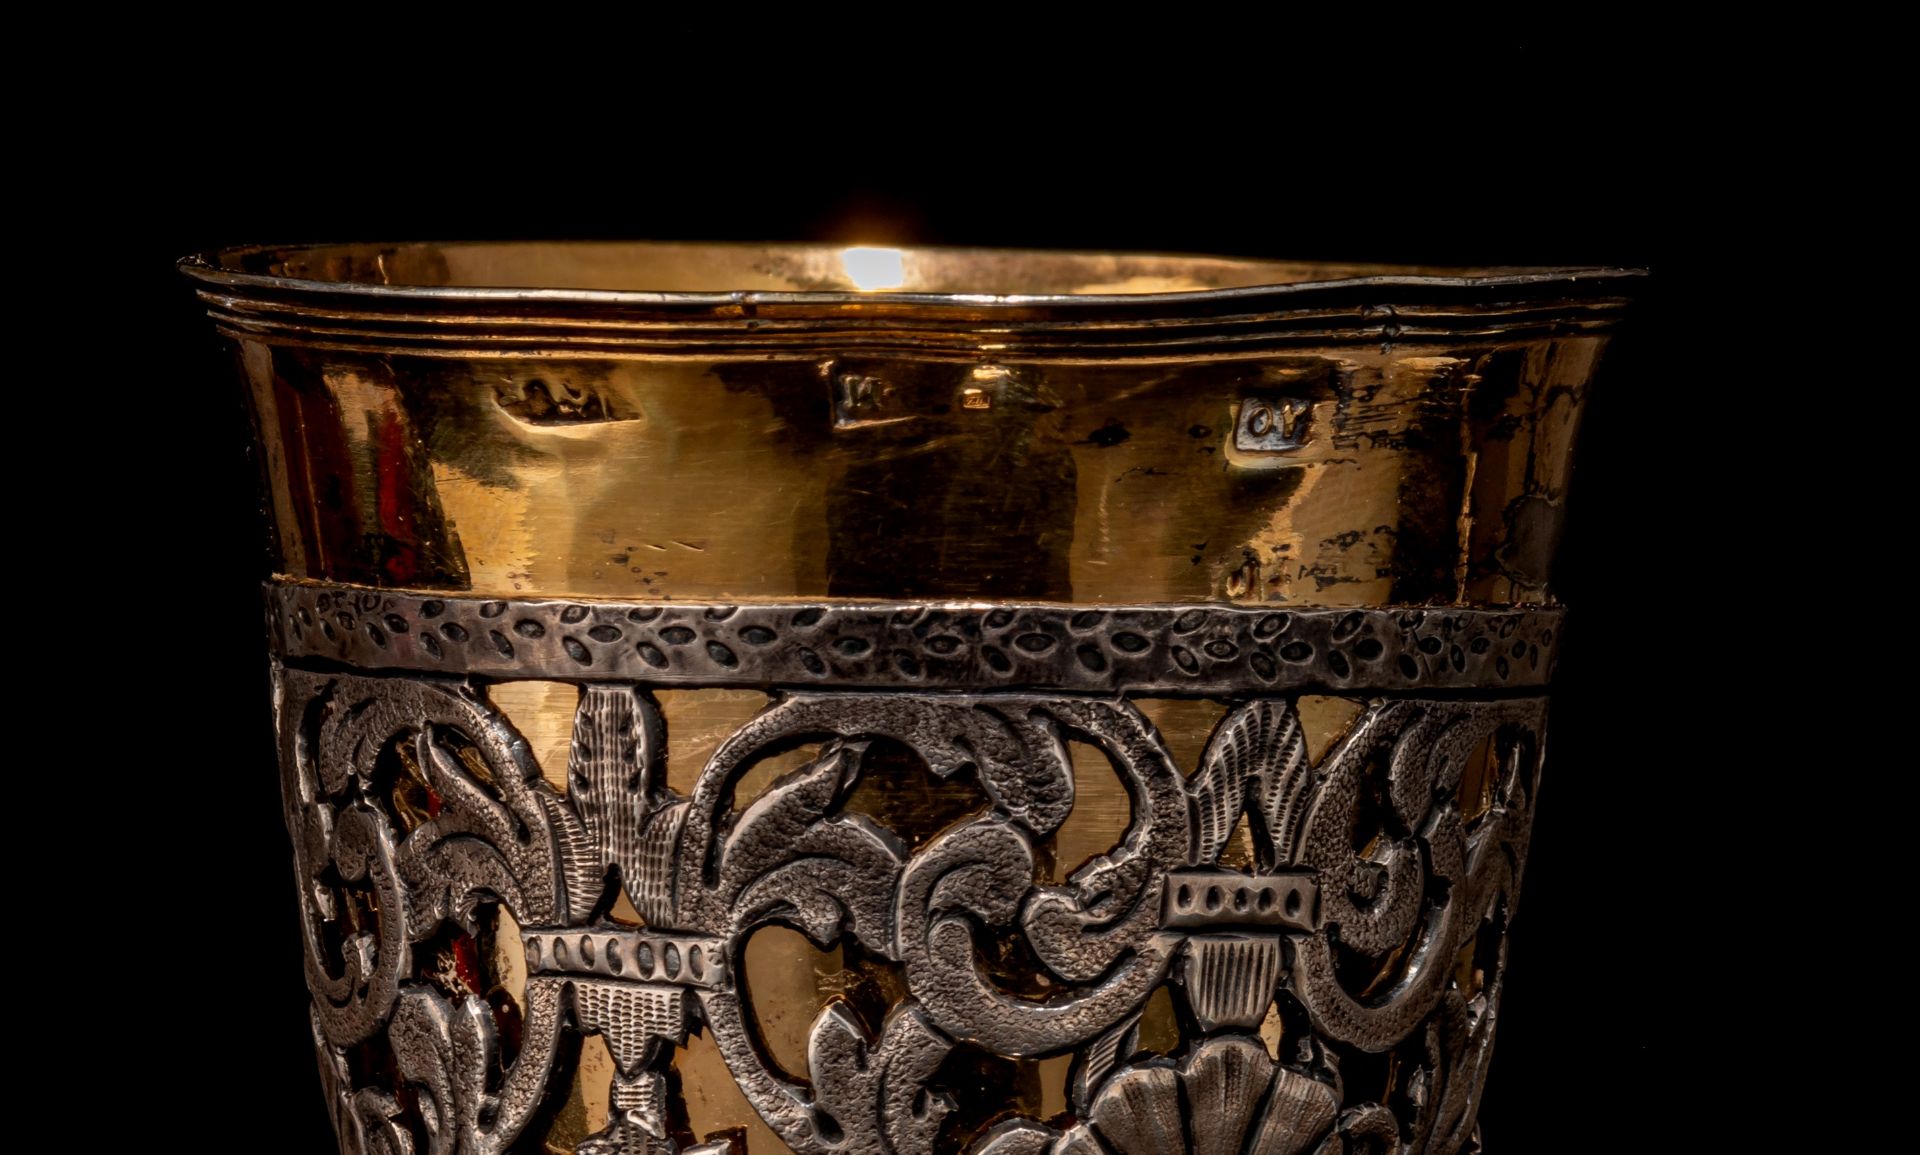 An 18th-century Russian silver and parcel-gilt goblet set with silver open-work appliqué, H 15,8 cm, - Image 7 of 7